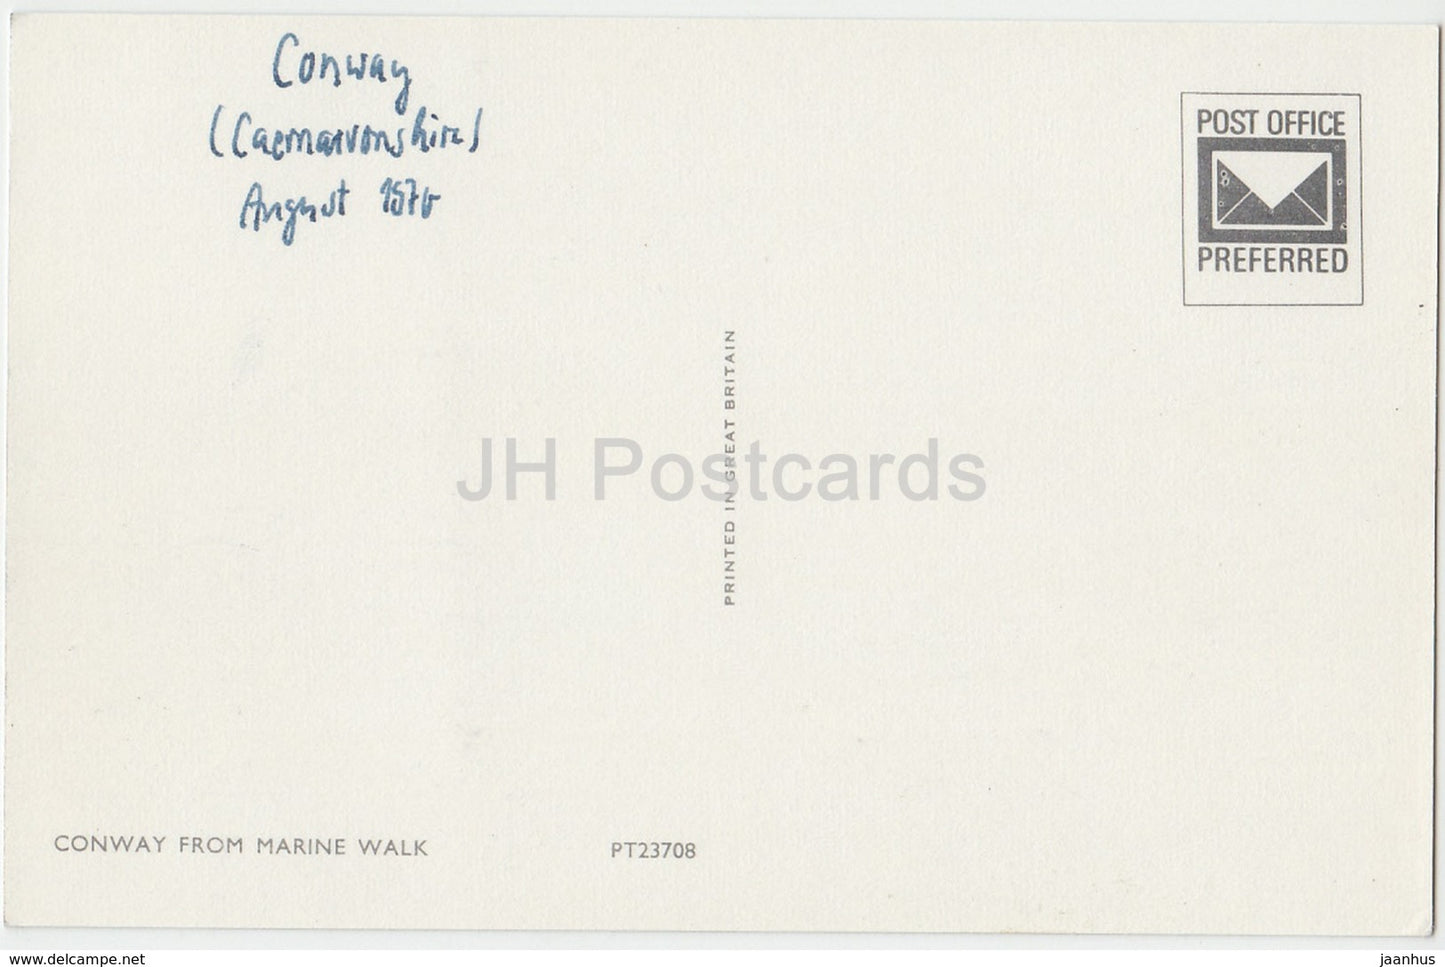 Conway from marine Walk - boat - PT23708 - 1970 - United Kingdom - Wales - used